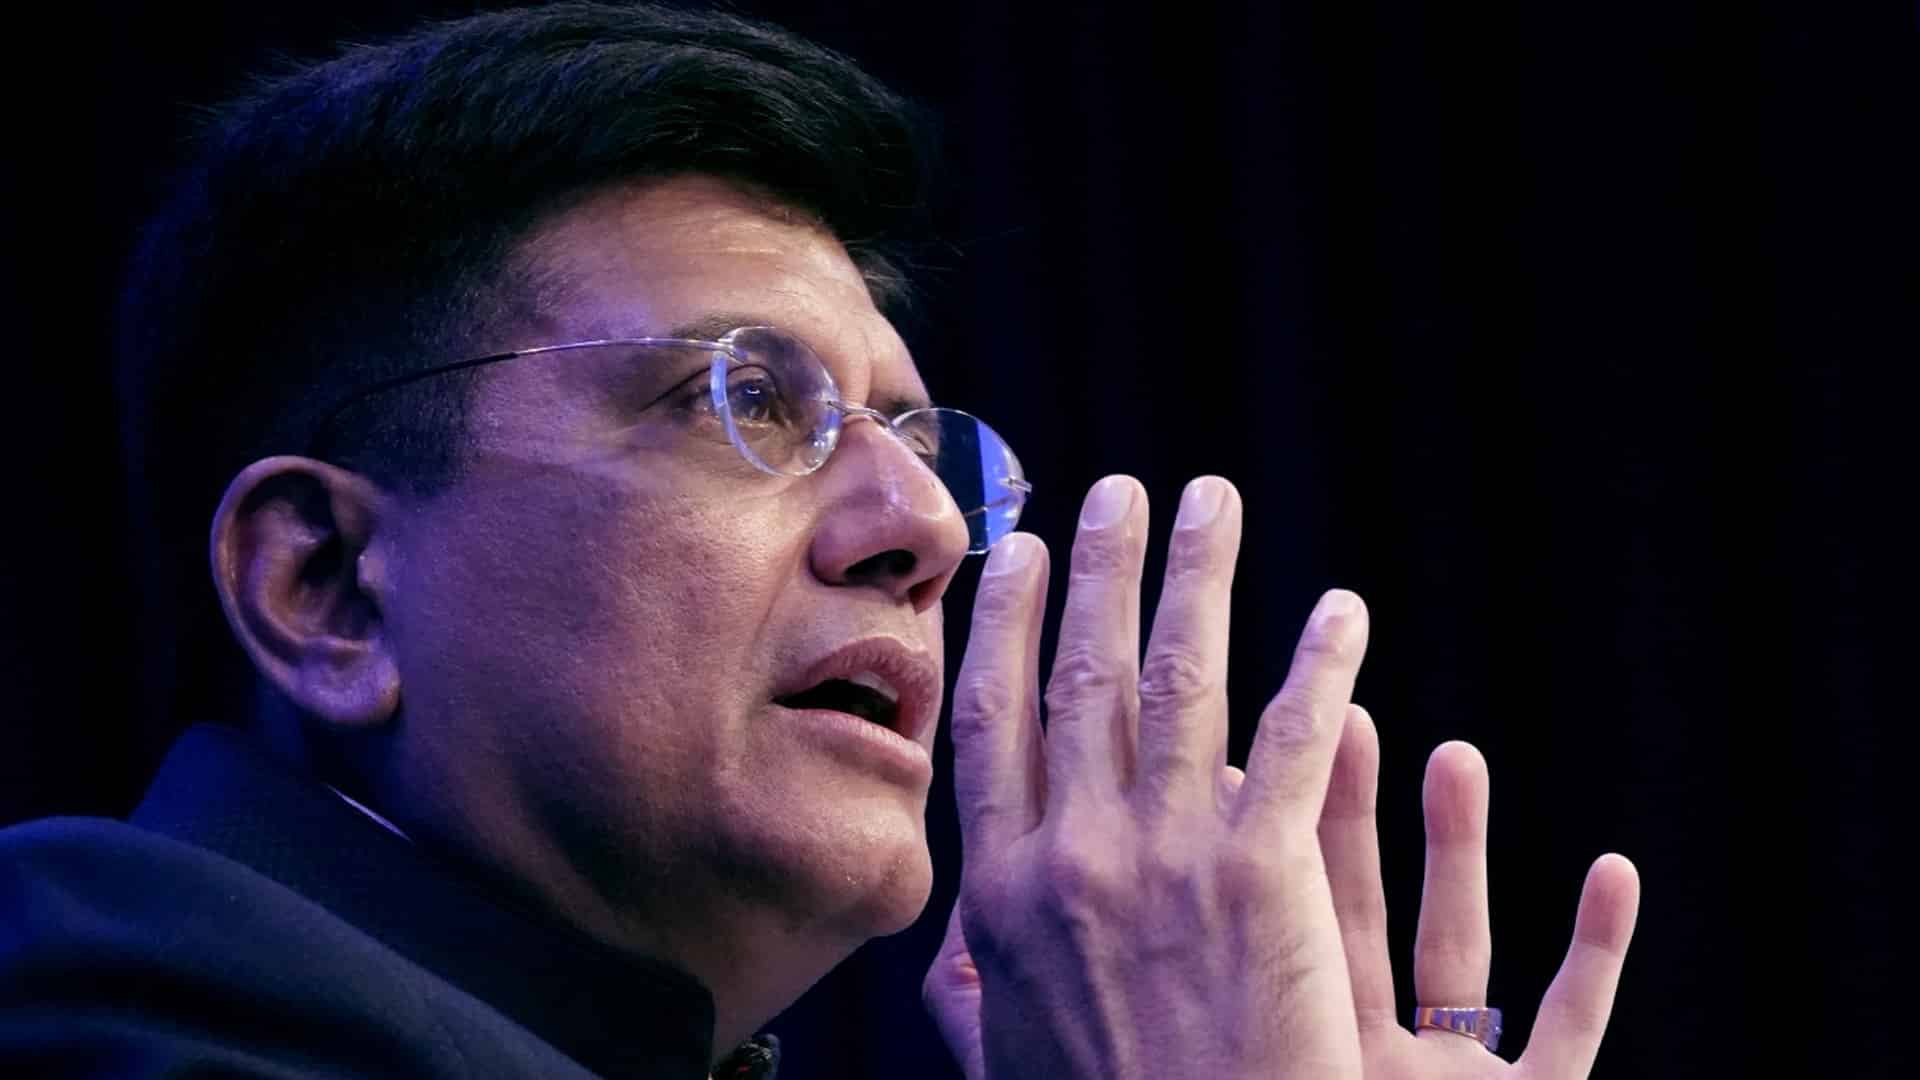 Indian economy may touch USD 30 tn in next 30 years: Goyal